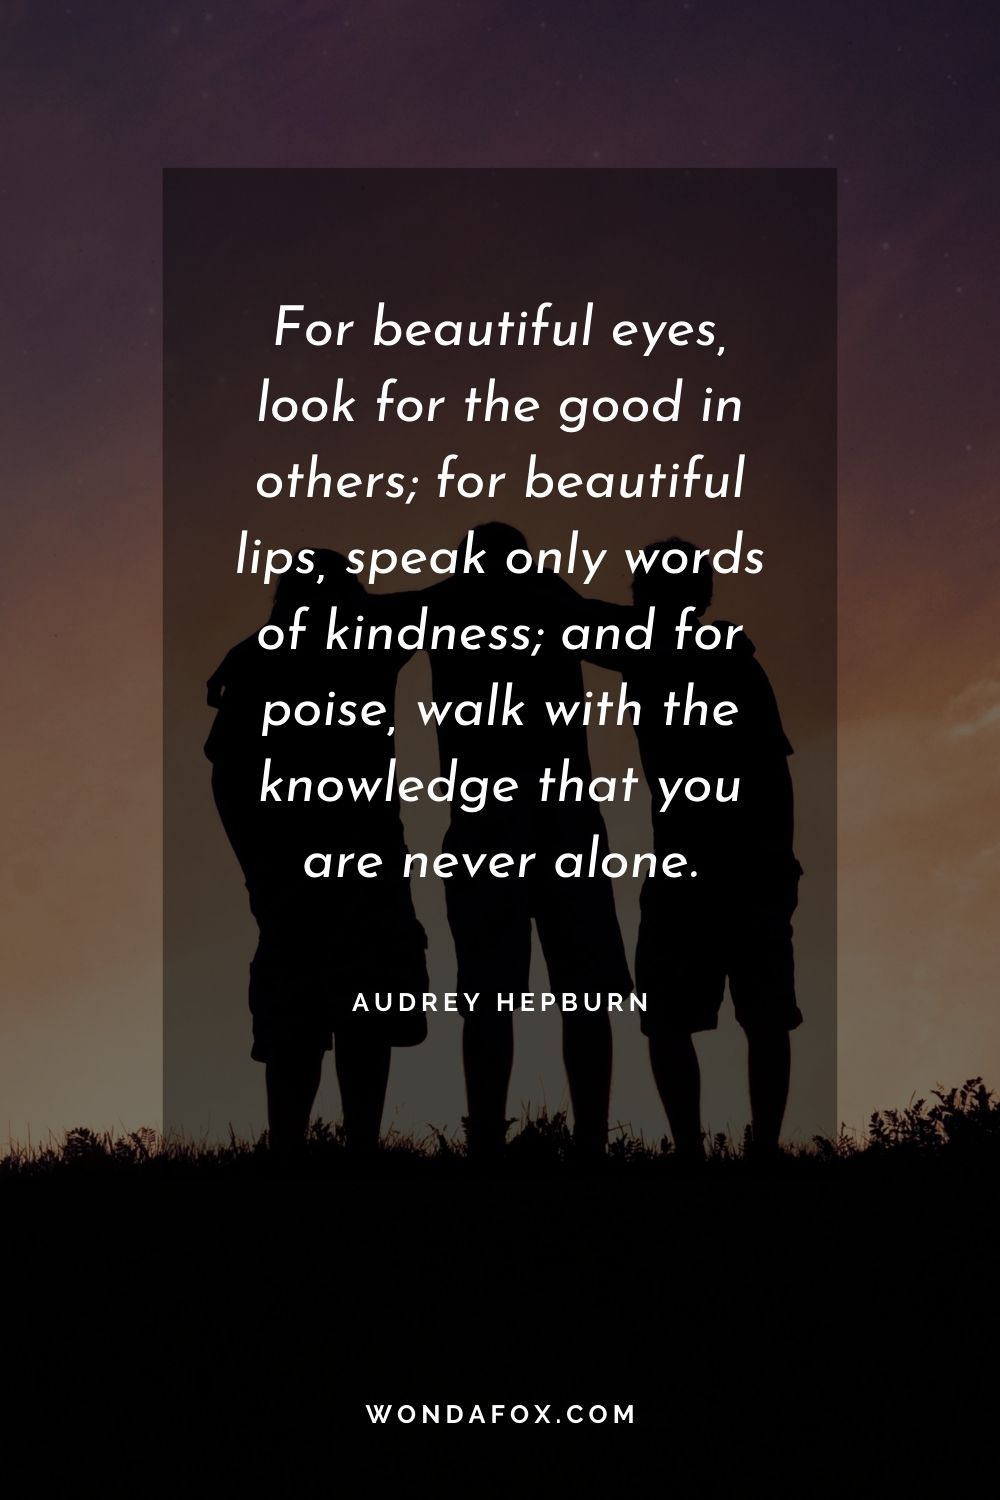 For beautiful eyes, look for the good in others; for beautiful lips, speak only words of kindness; and for poise, walk with the knowledge that you are never alone